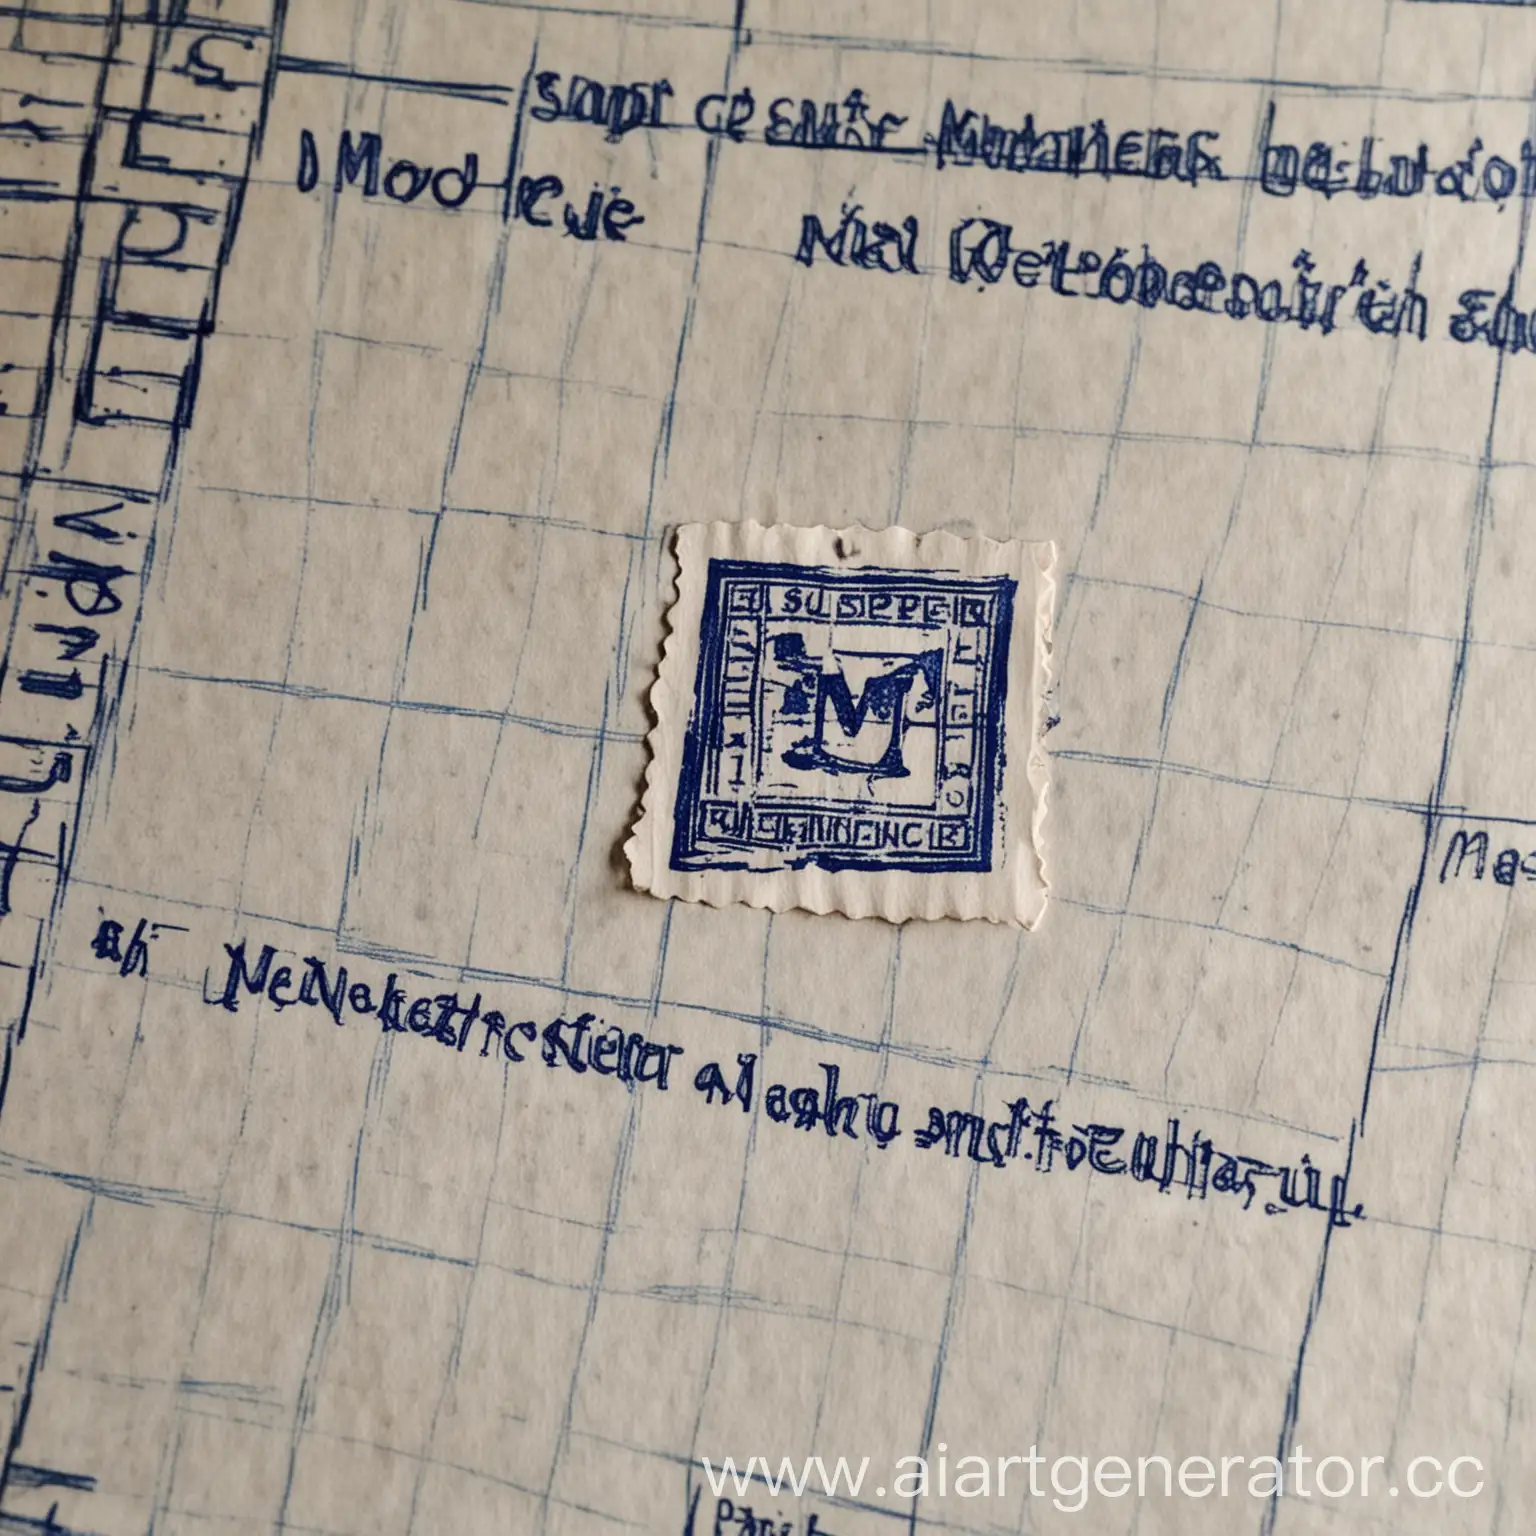 Blue-Square-Stamp-with-MelokoderSuper-Mathematician-Inscription-on-Paper-in-Cage